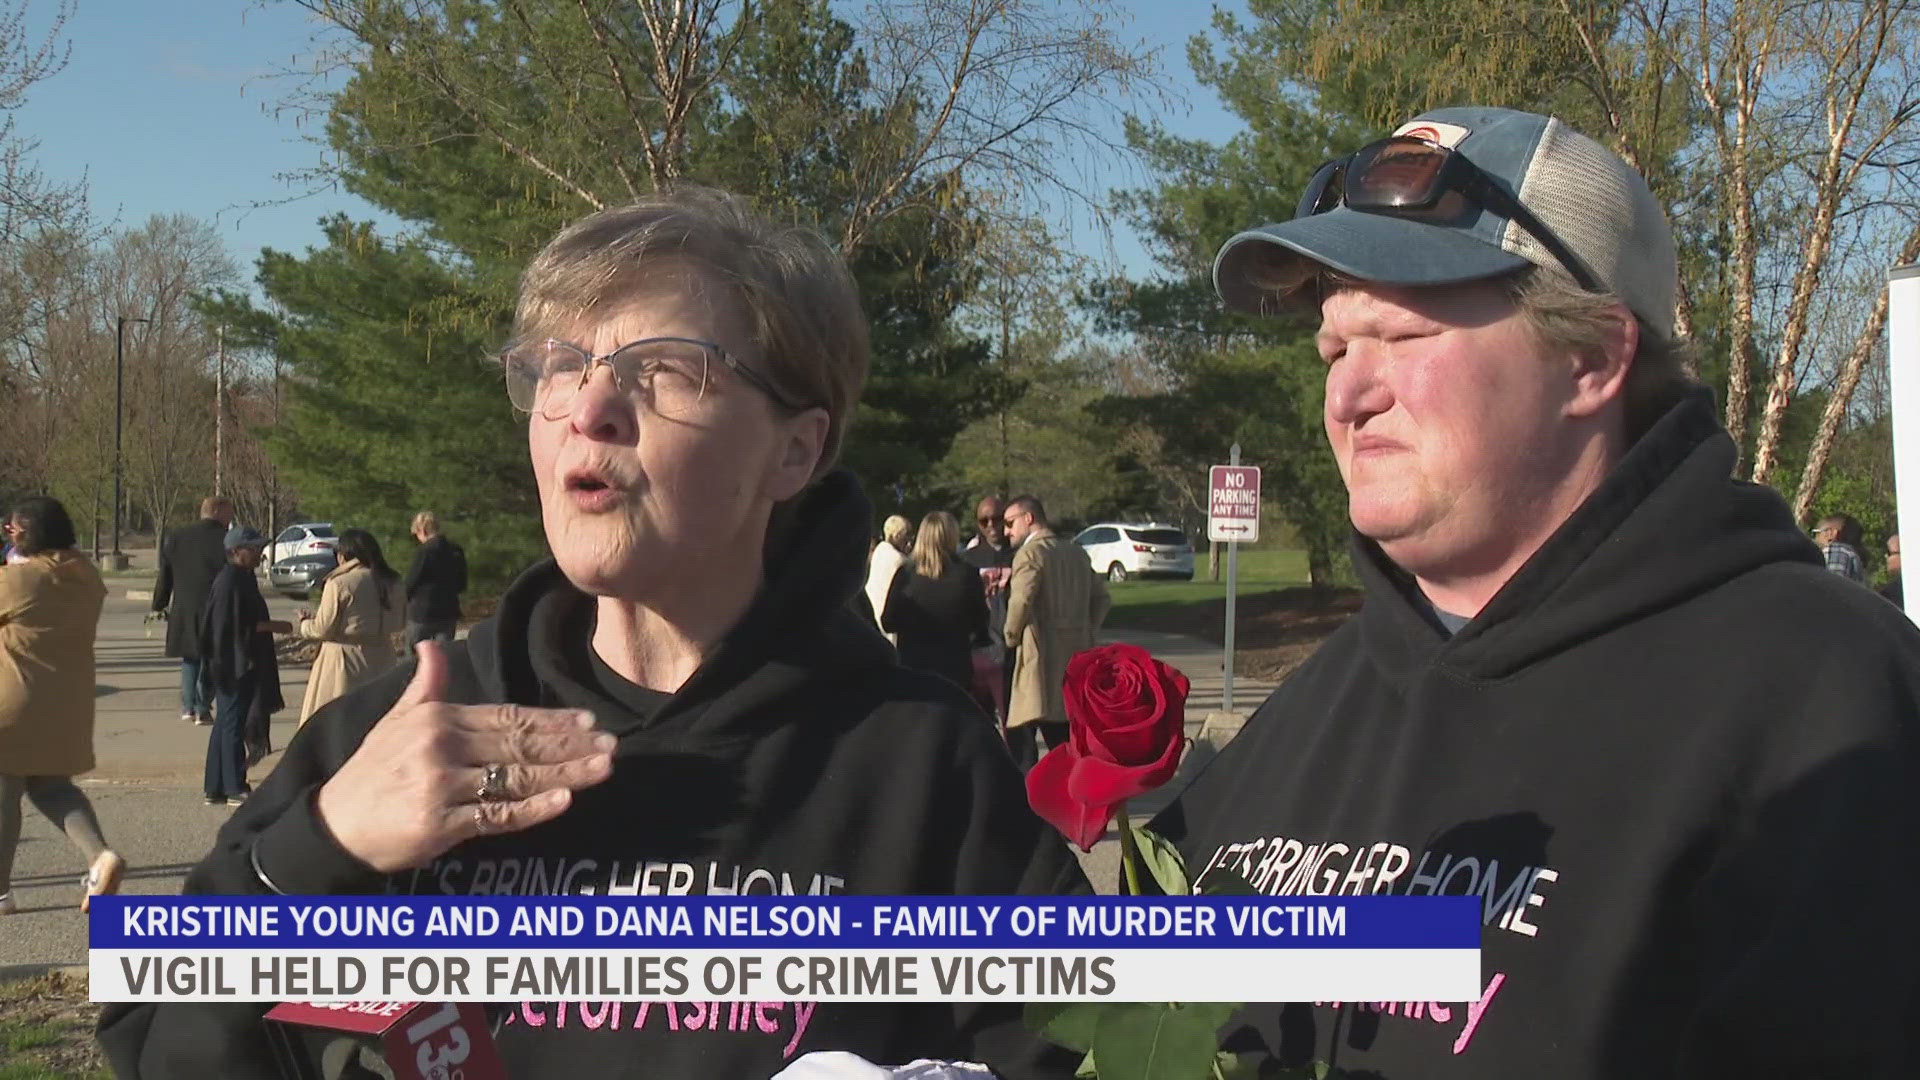 There was a vigil held in Grand Rapids for families of crime victims.